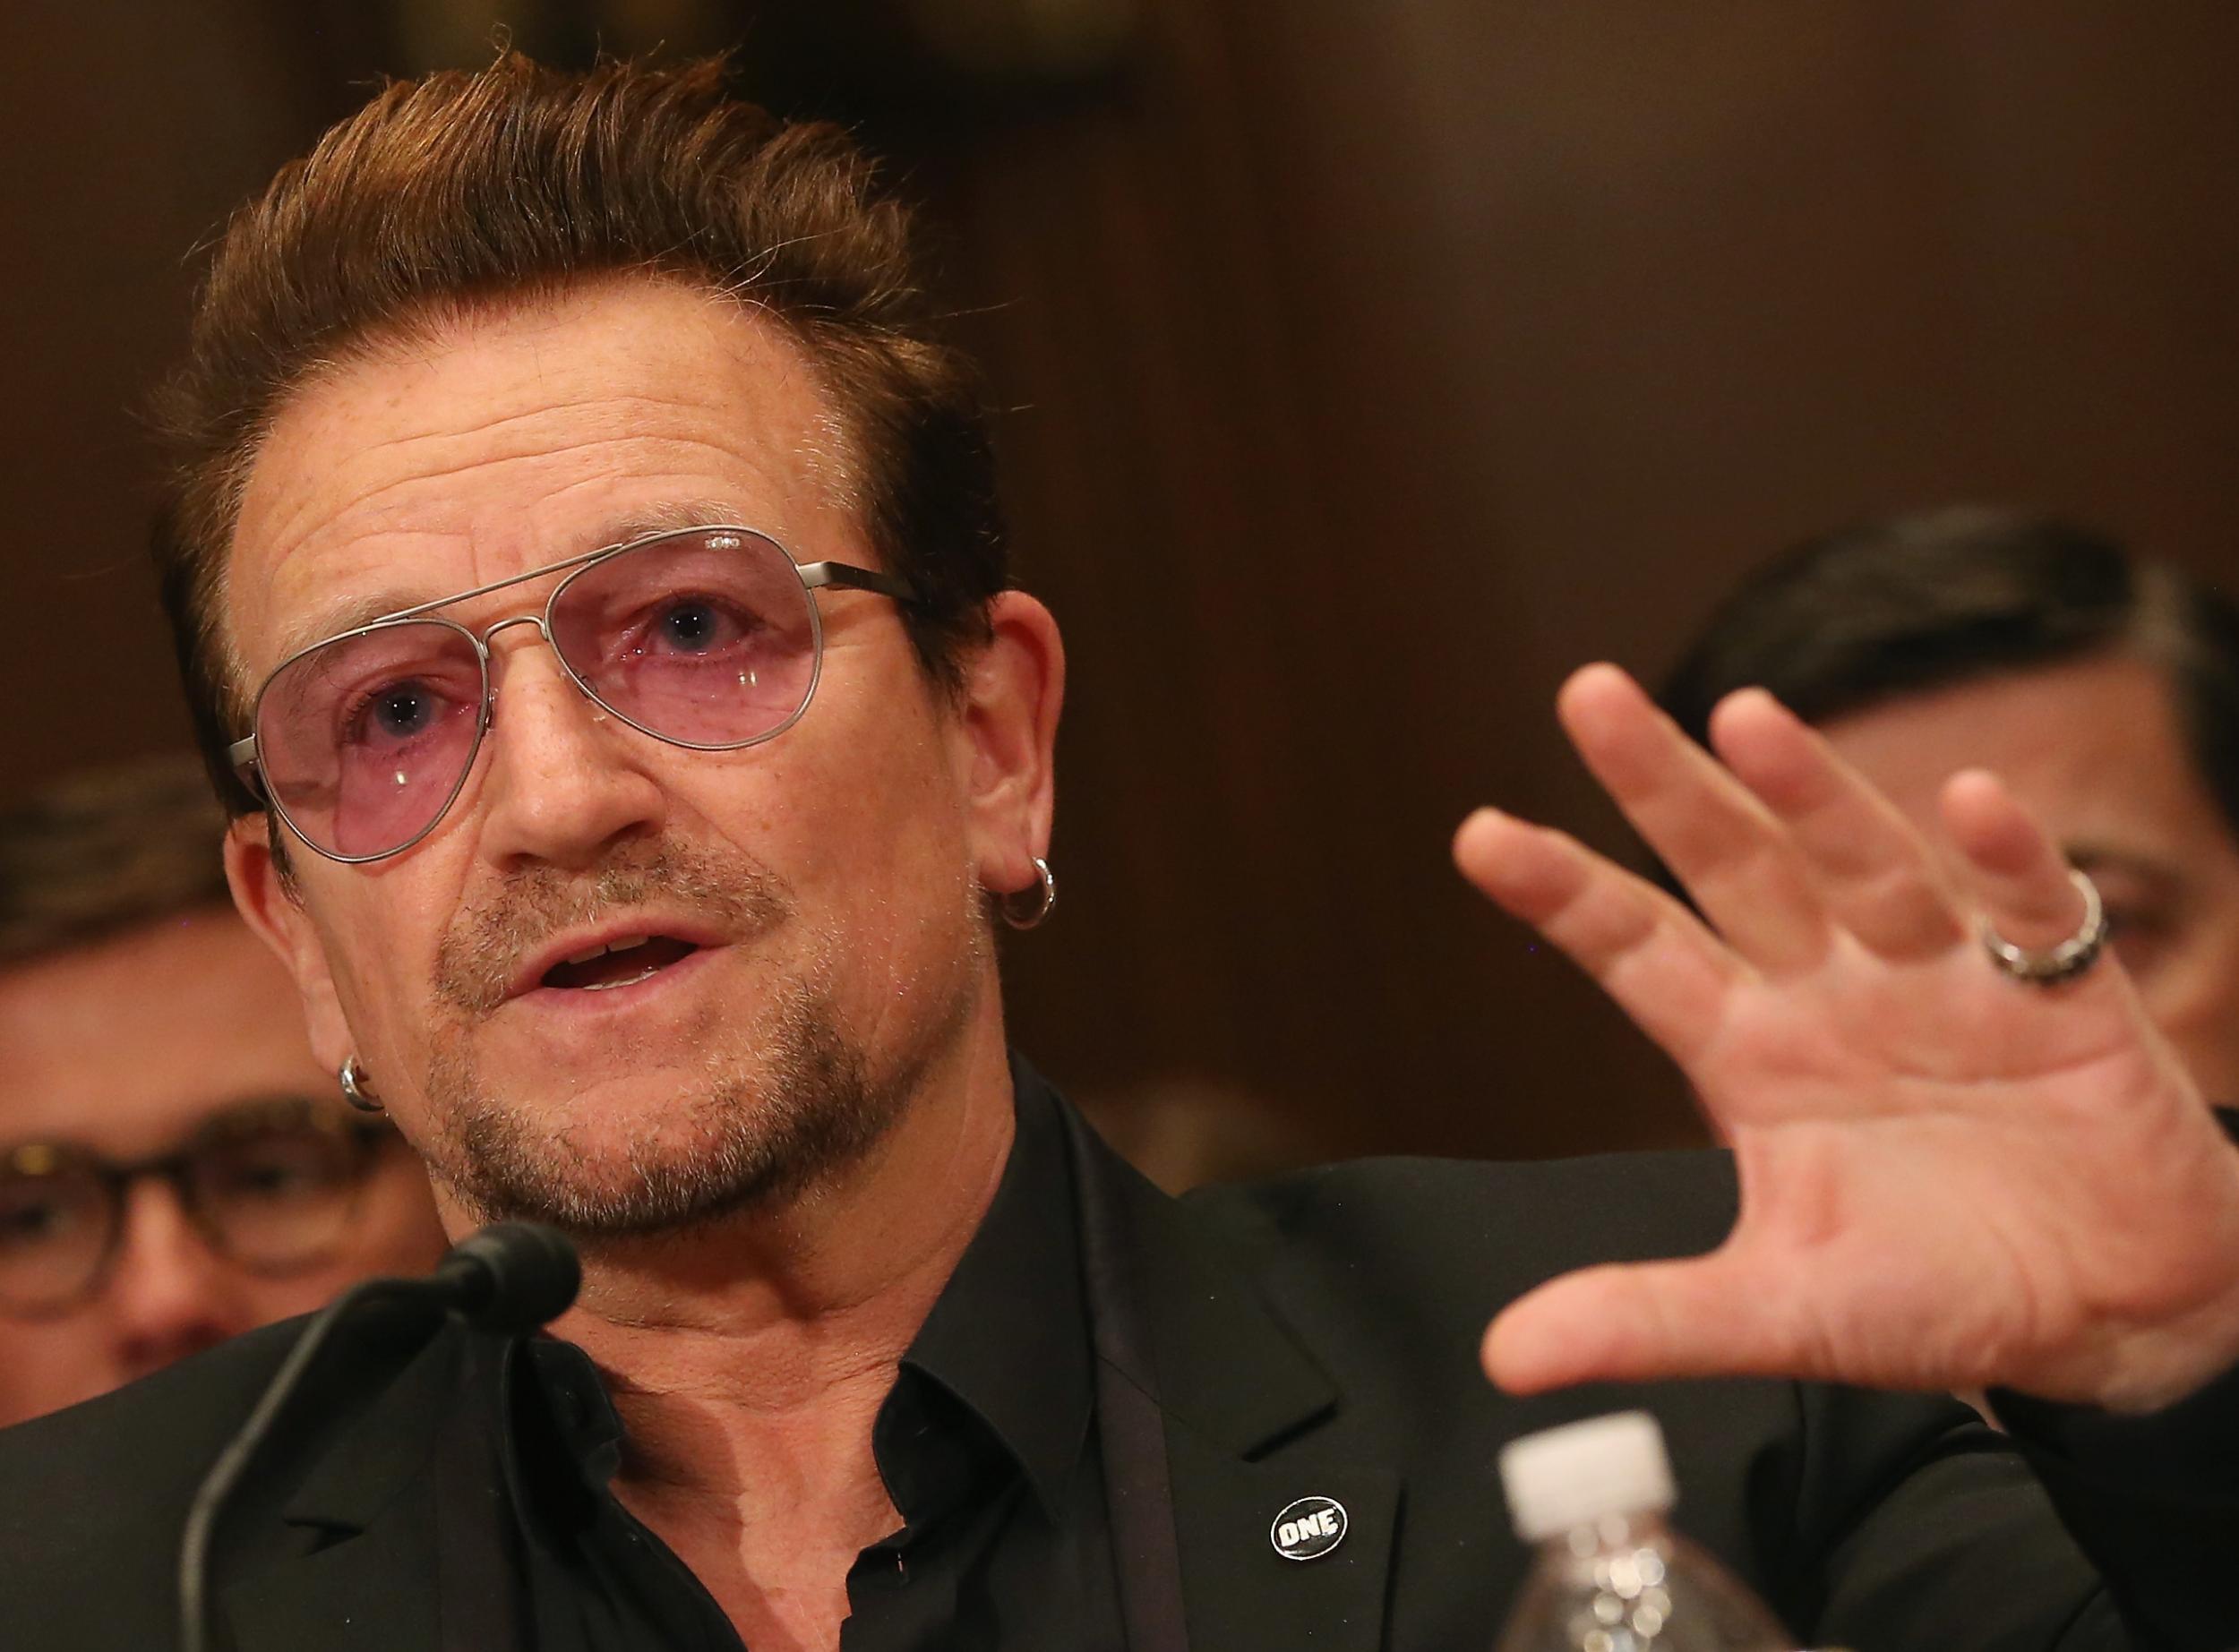 Bono has a house in the nearby town of Eze and is believed to have been enjoying time off with friends when the atrocity took place